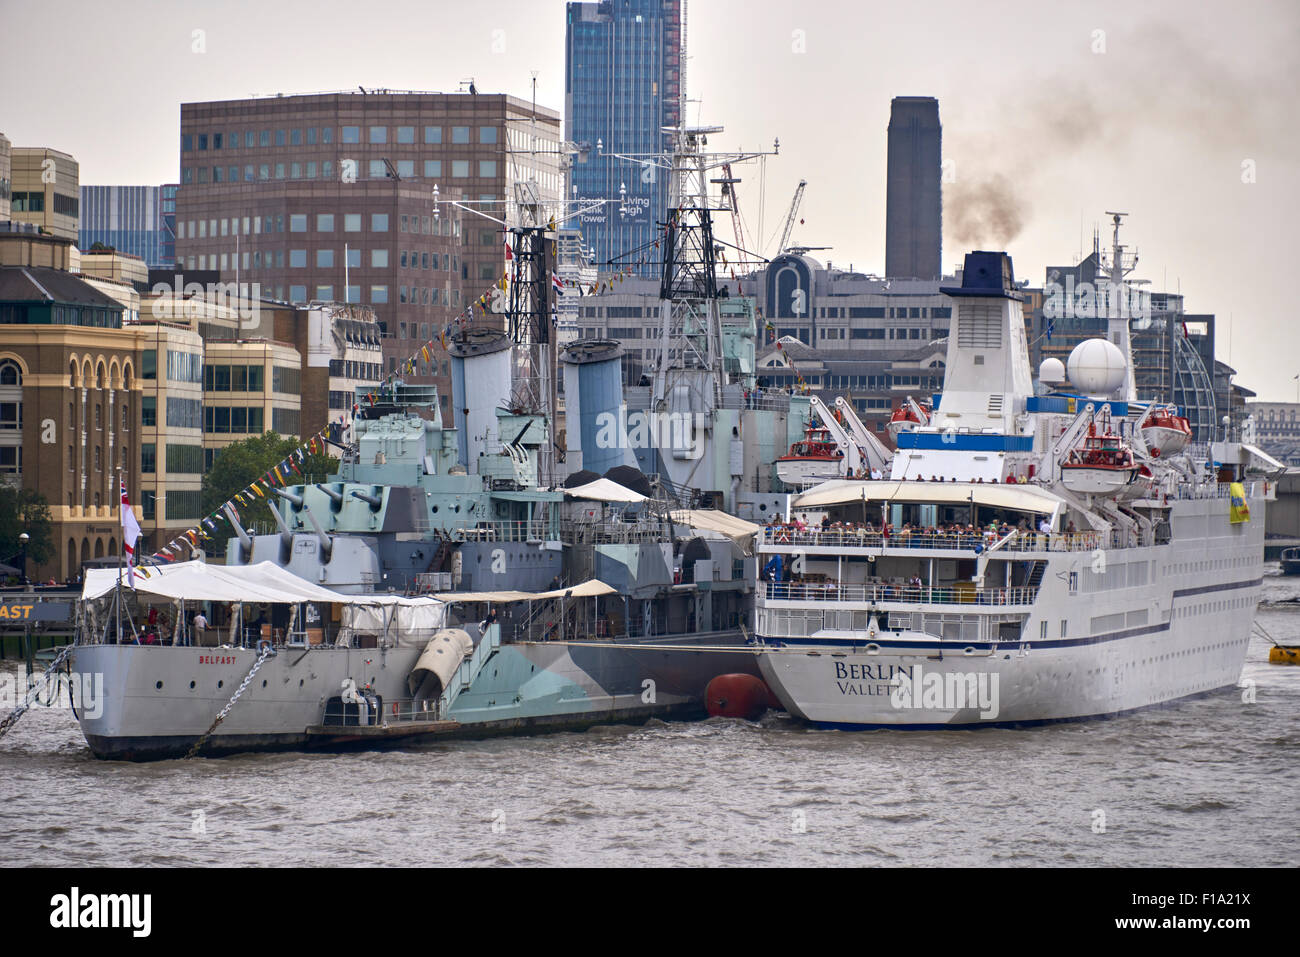 HMS Belfast is a museum ship, originally a Royal Navy light cruiser, permanently moored in London on the River Thames Stock Photo